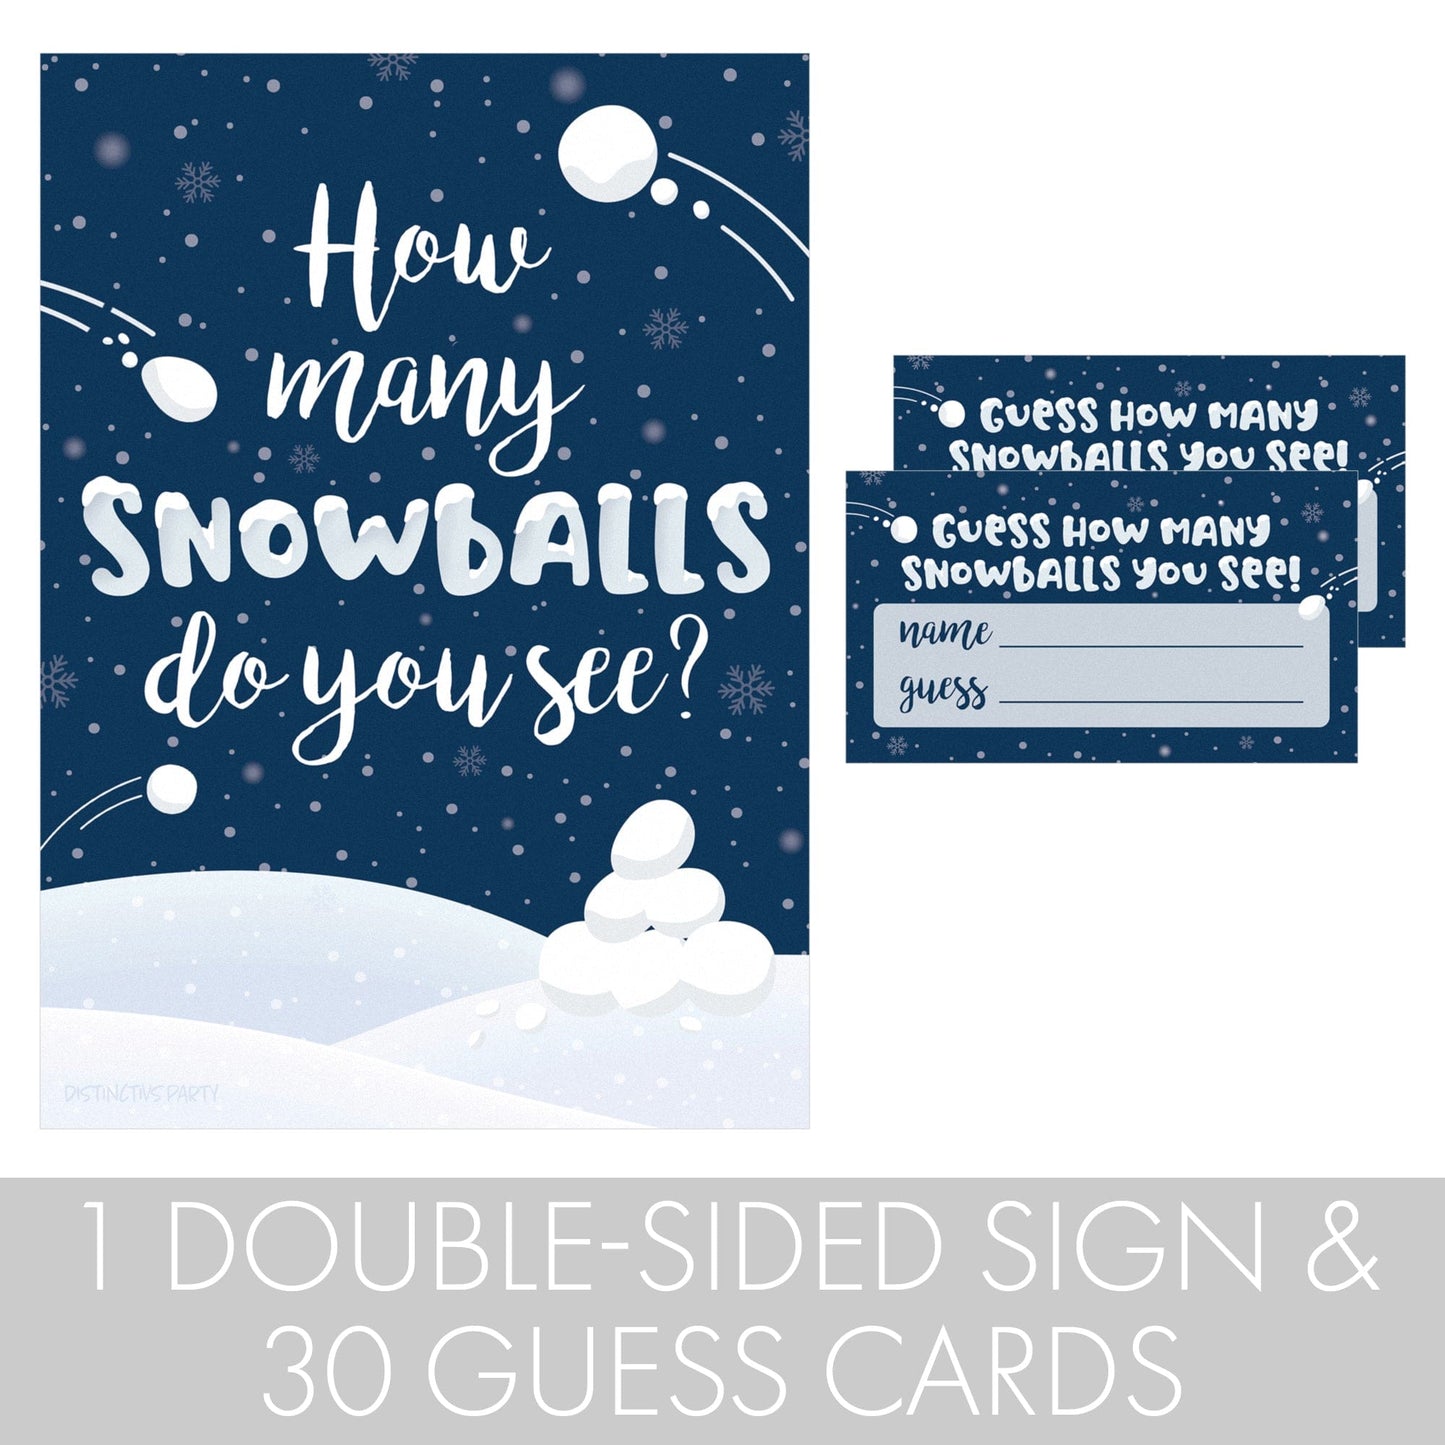 Winter Holiday Party Games - How Many Snowballs Holiday Guessing Game